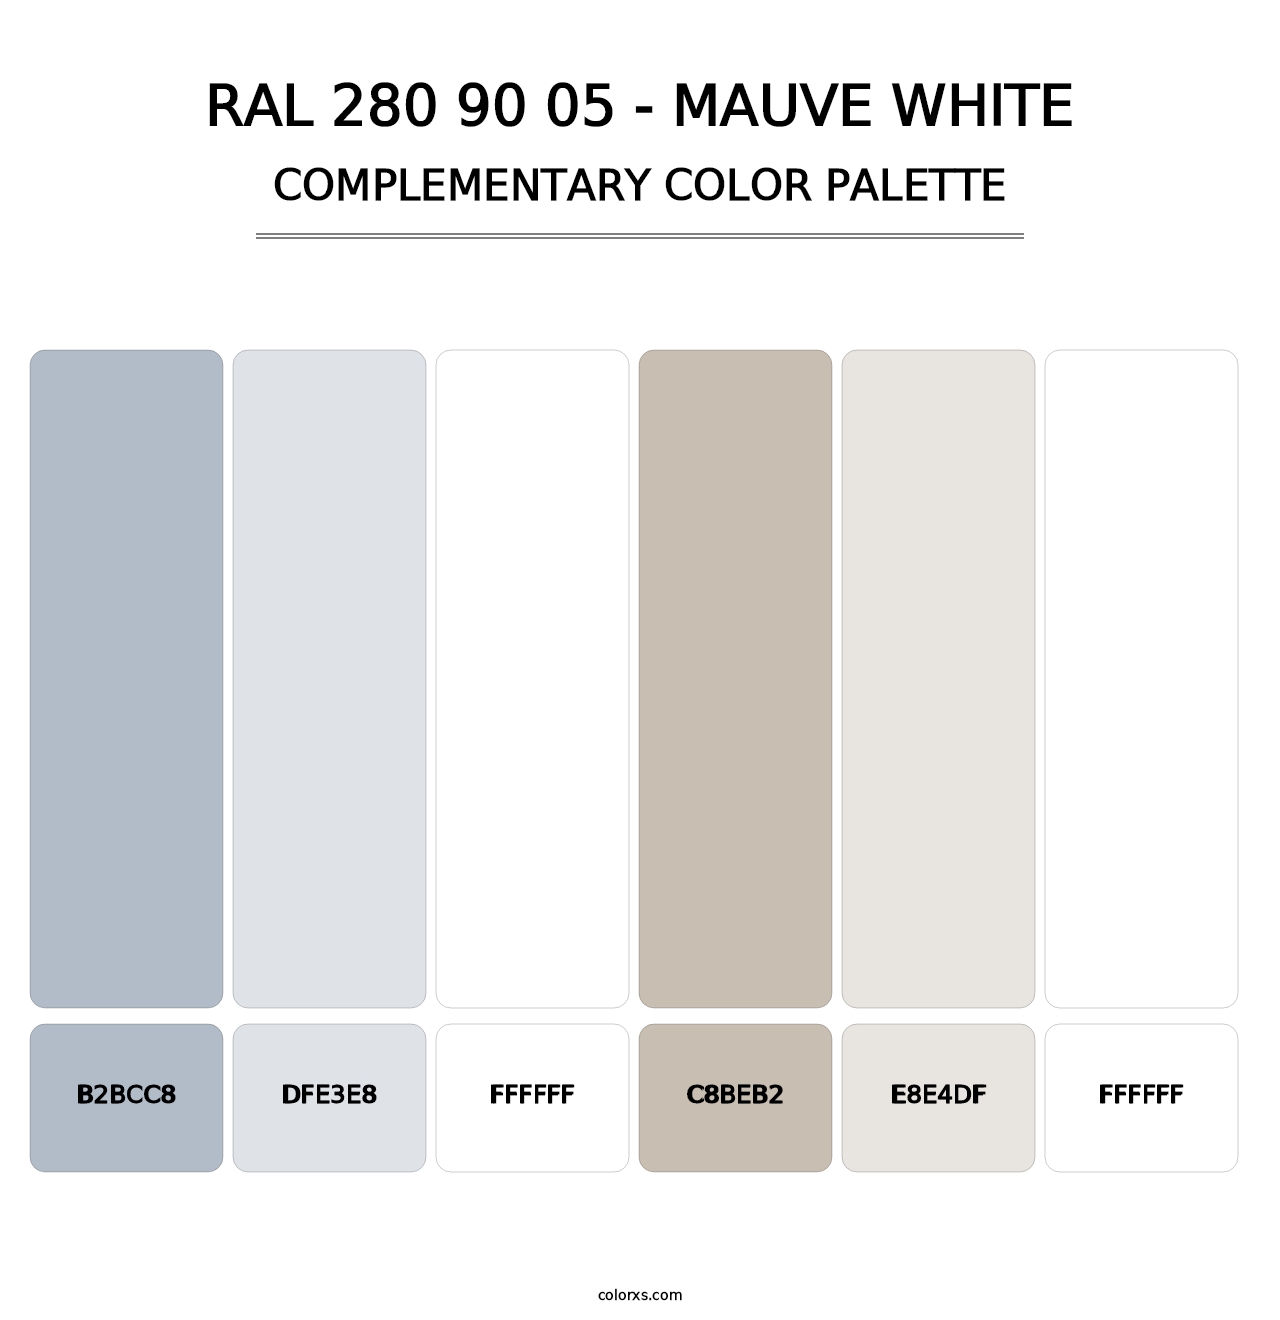 RAL 280 90 05 - Mauve White - Complementary Color Palette